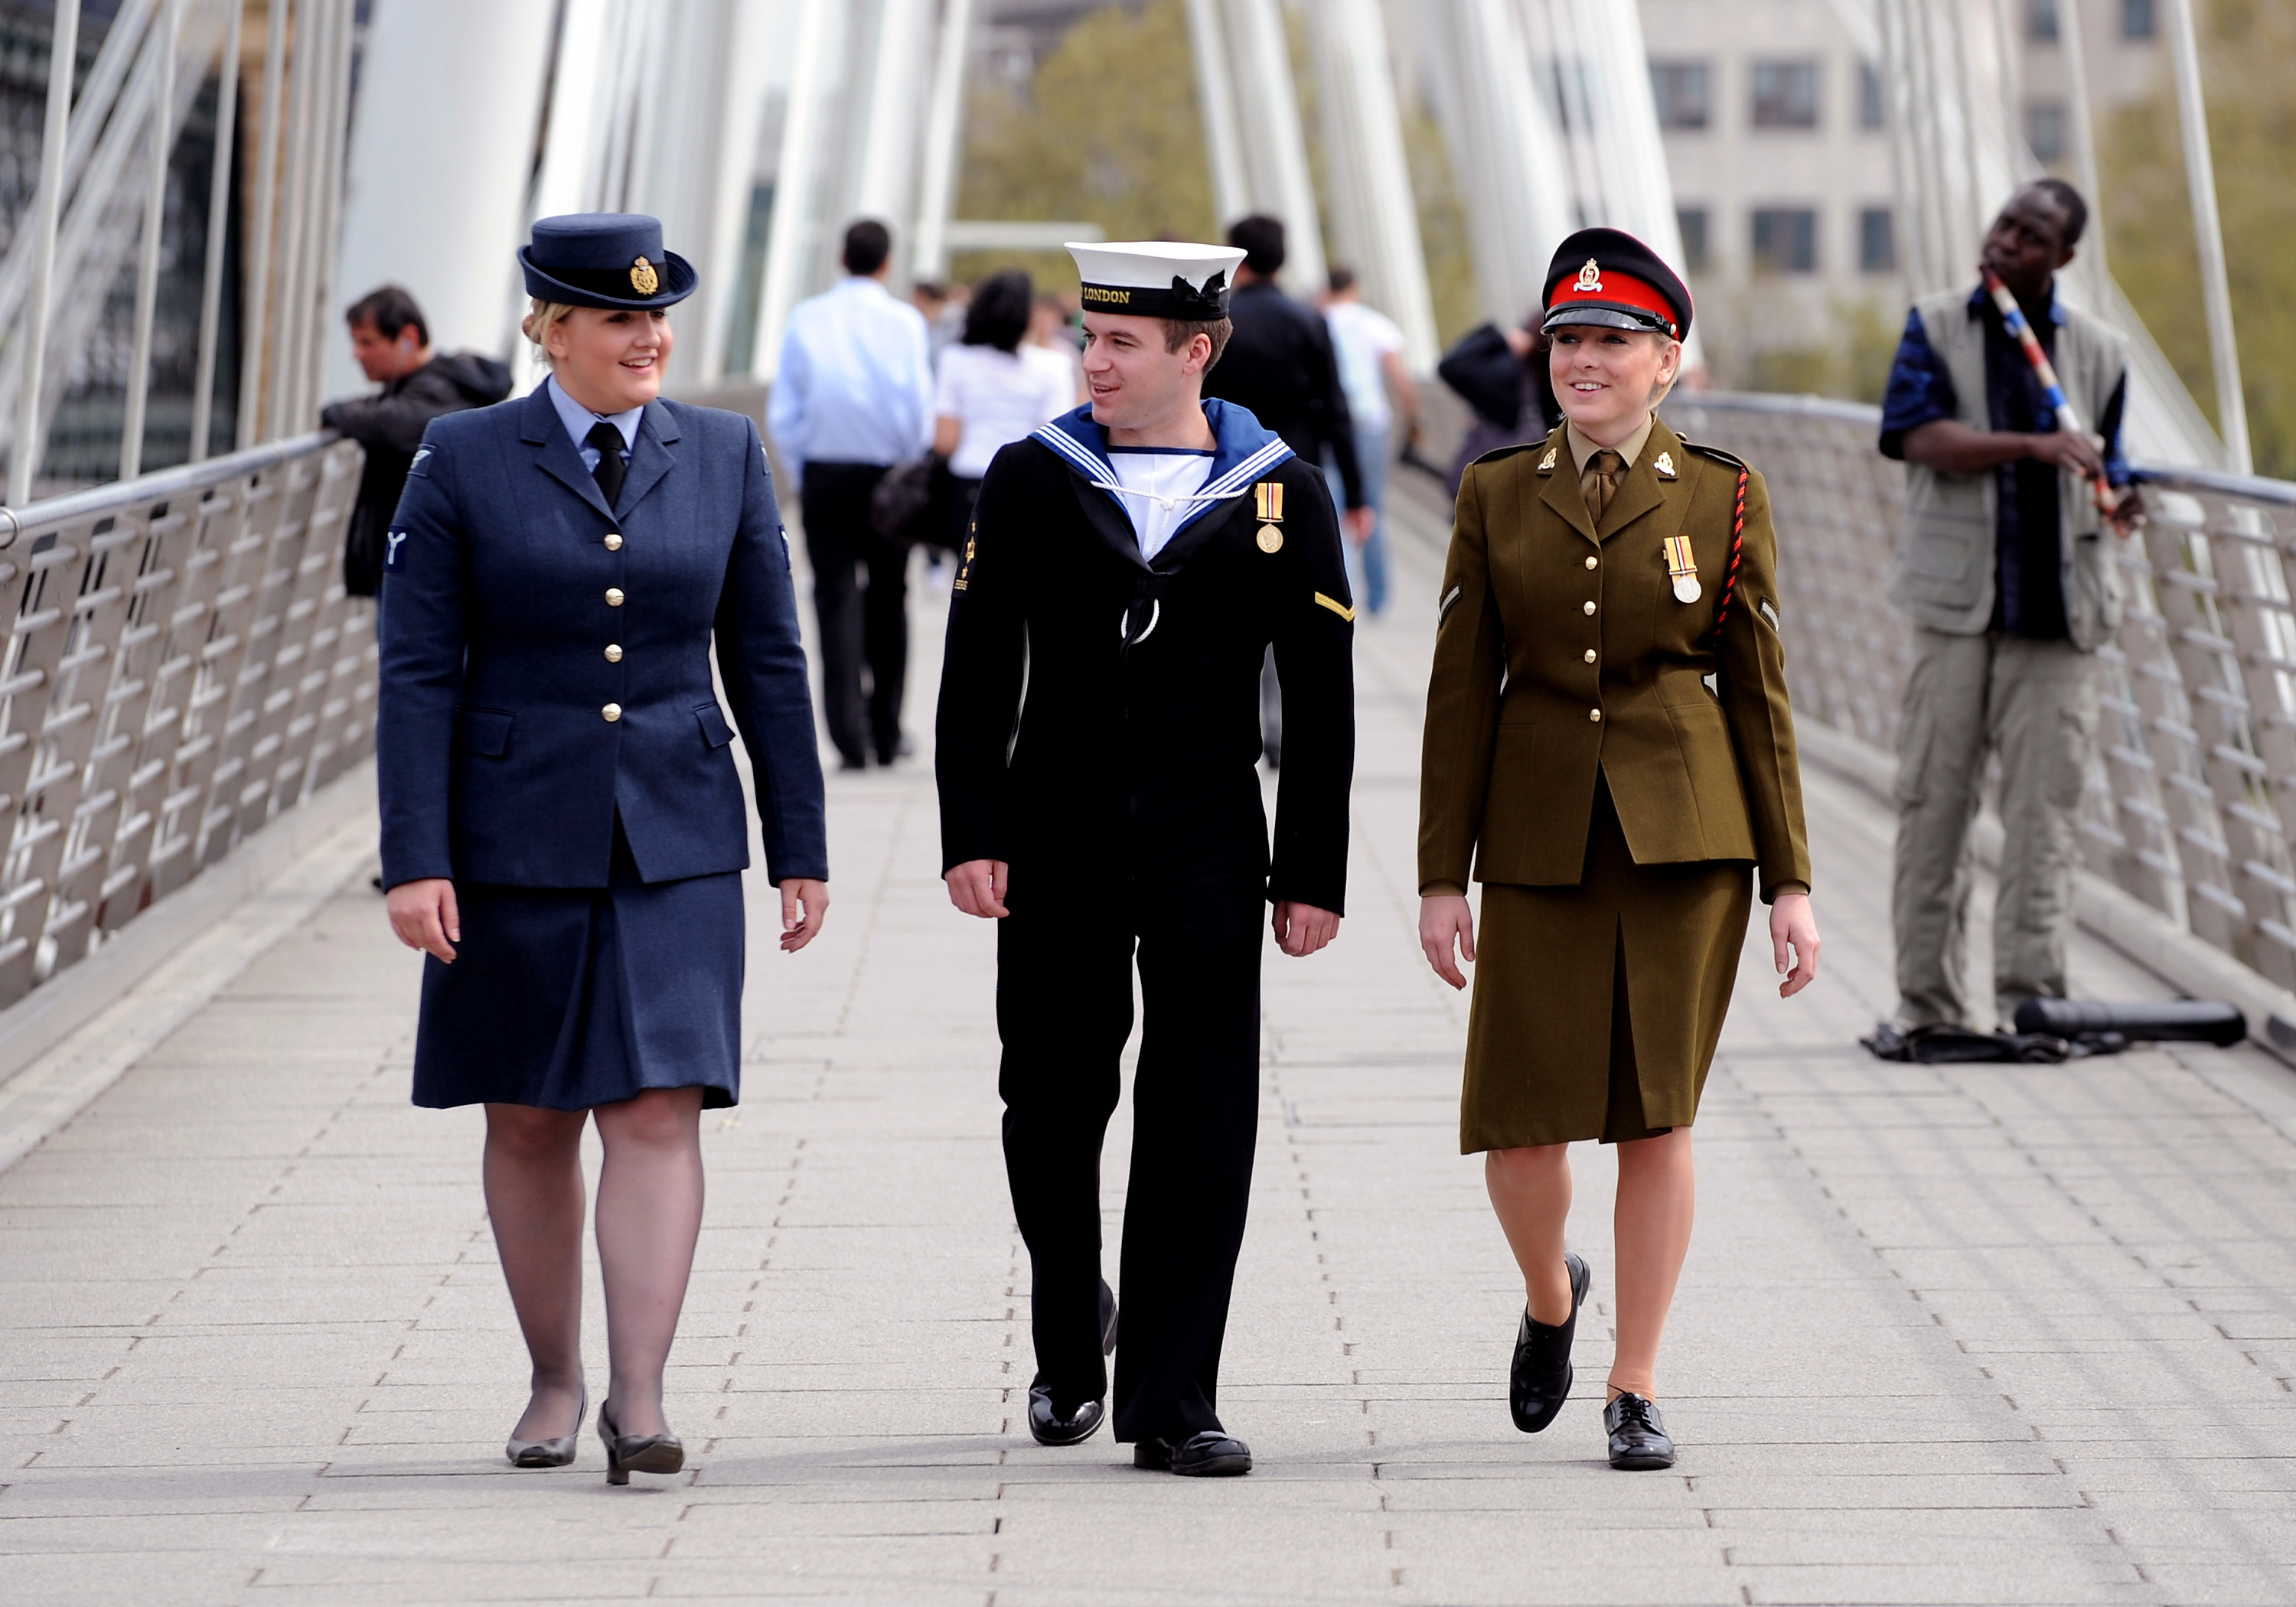 From left, a Royal Air Force servicewoman, a Royal Navy sailor and an Army soldier stroll thorugh London prior to Armed Forces Day 1010.